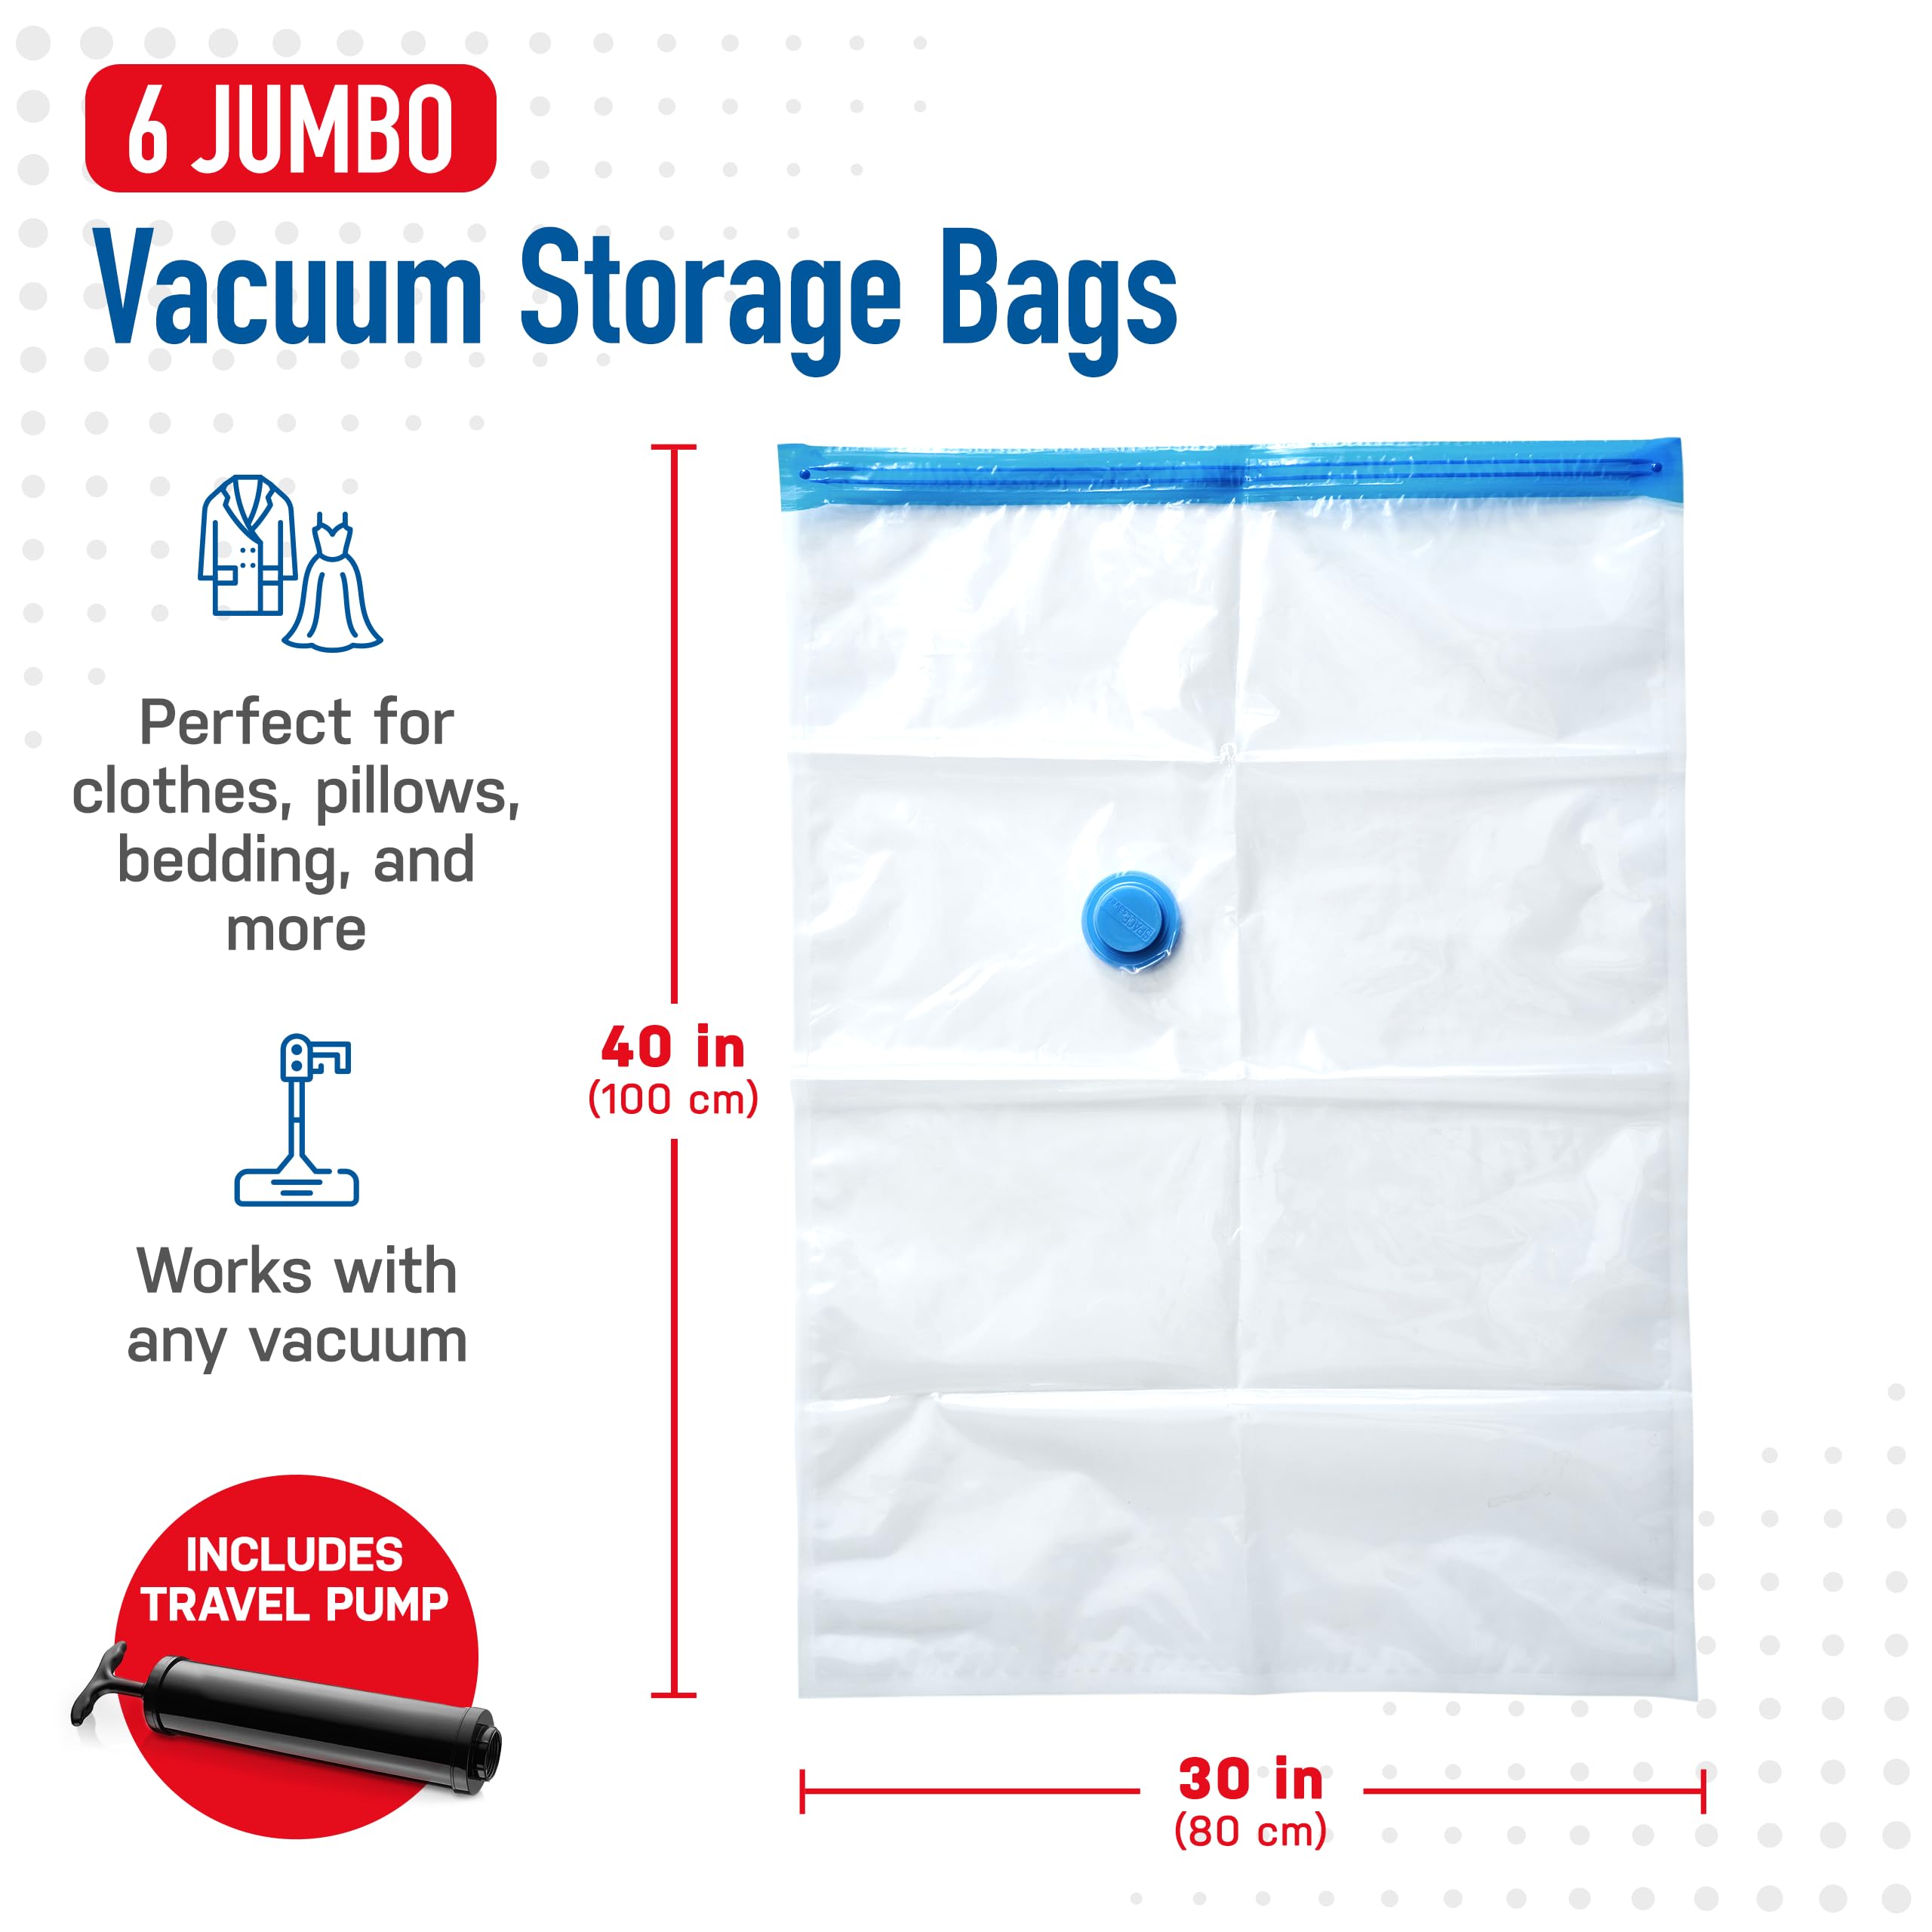 Spacesaver's Space Saver Vacuum Storage Bags (Jumbo 6-Pack) Save 80% Space - Vacuum Sealed Bags for Comforters, Blankets, Bedding, Clothing - Compression Seal for Closet Storage - Pump for Travel